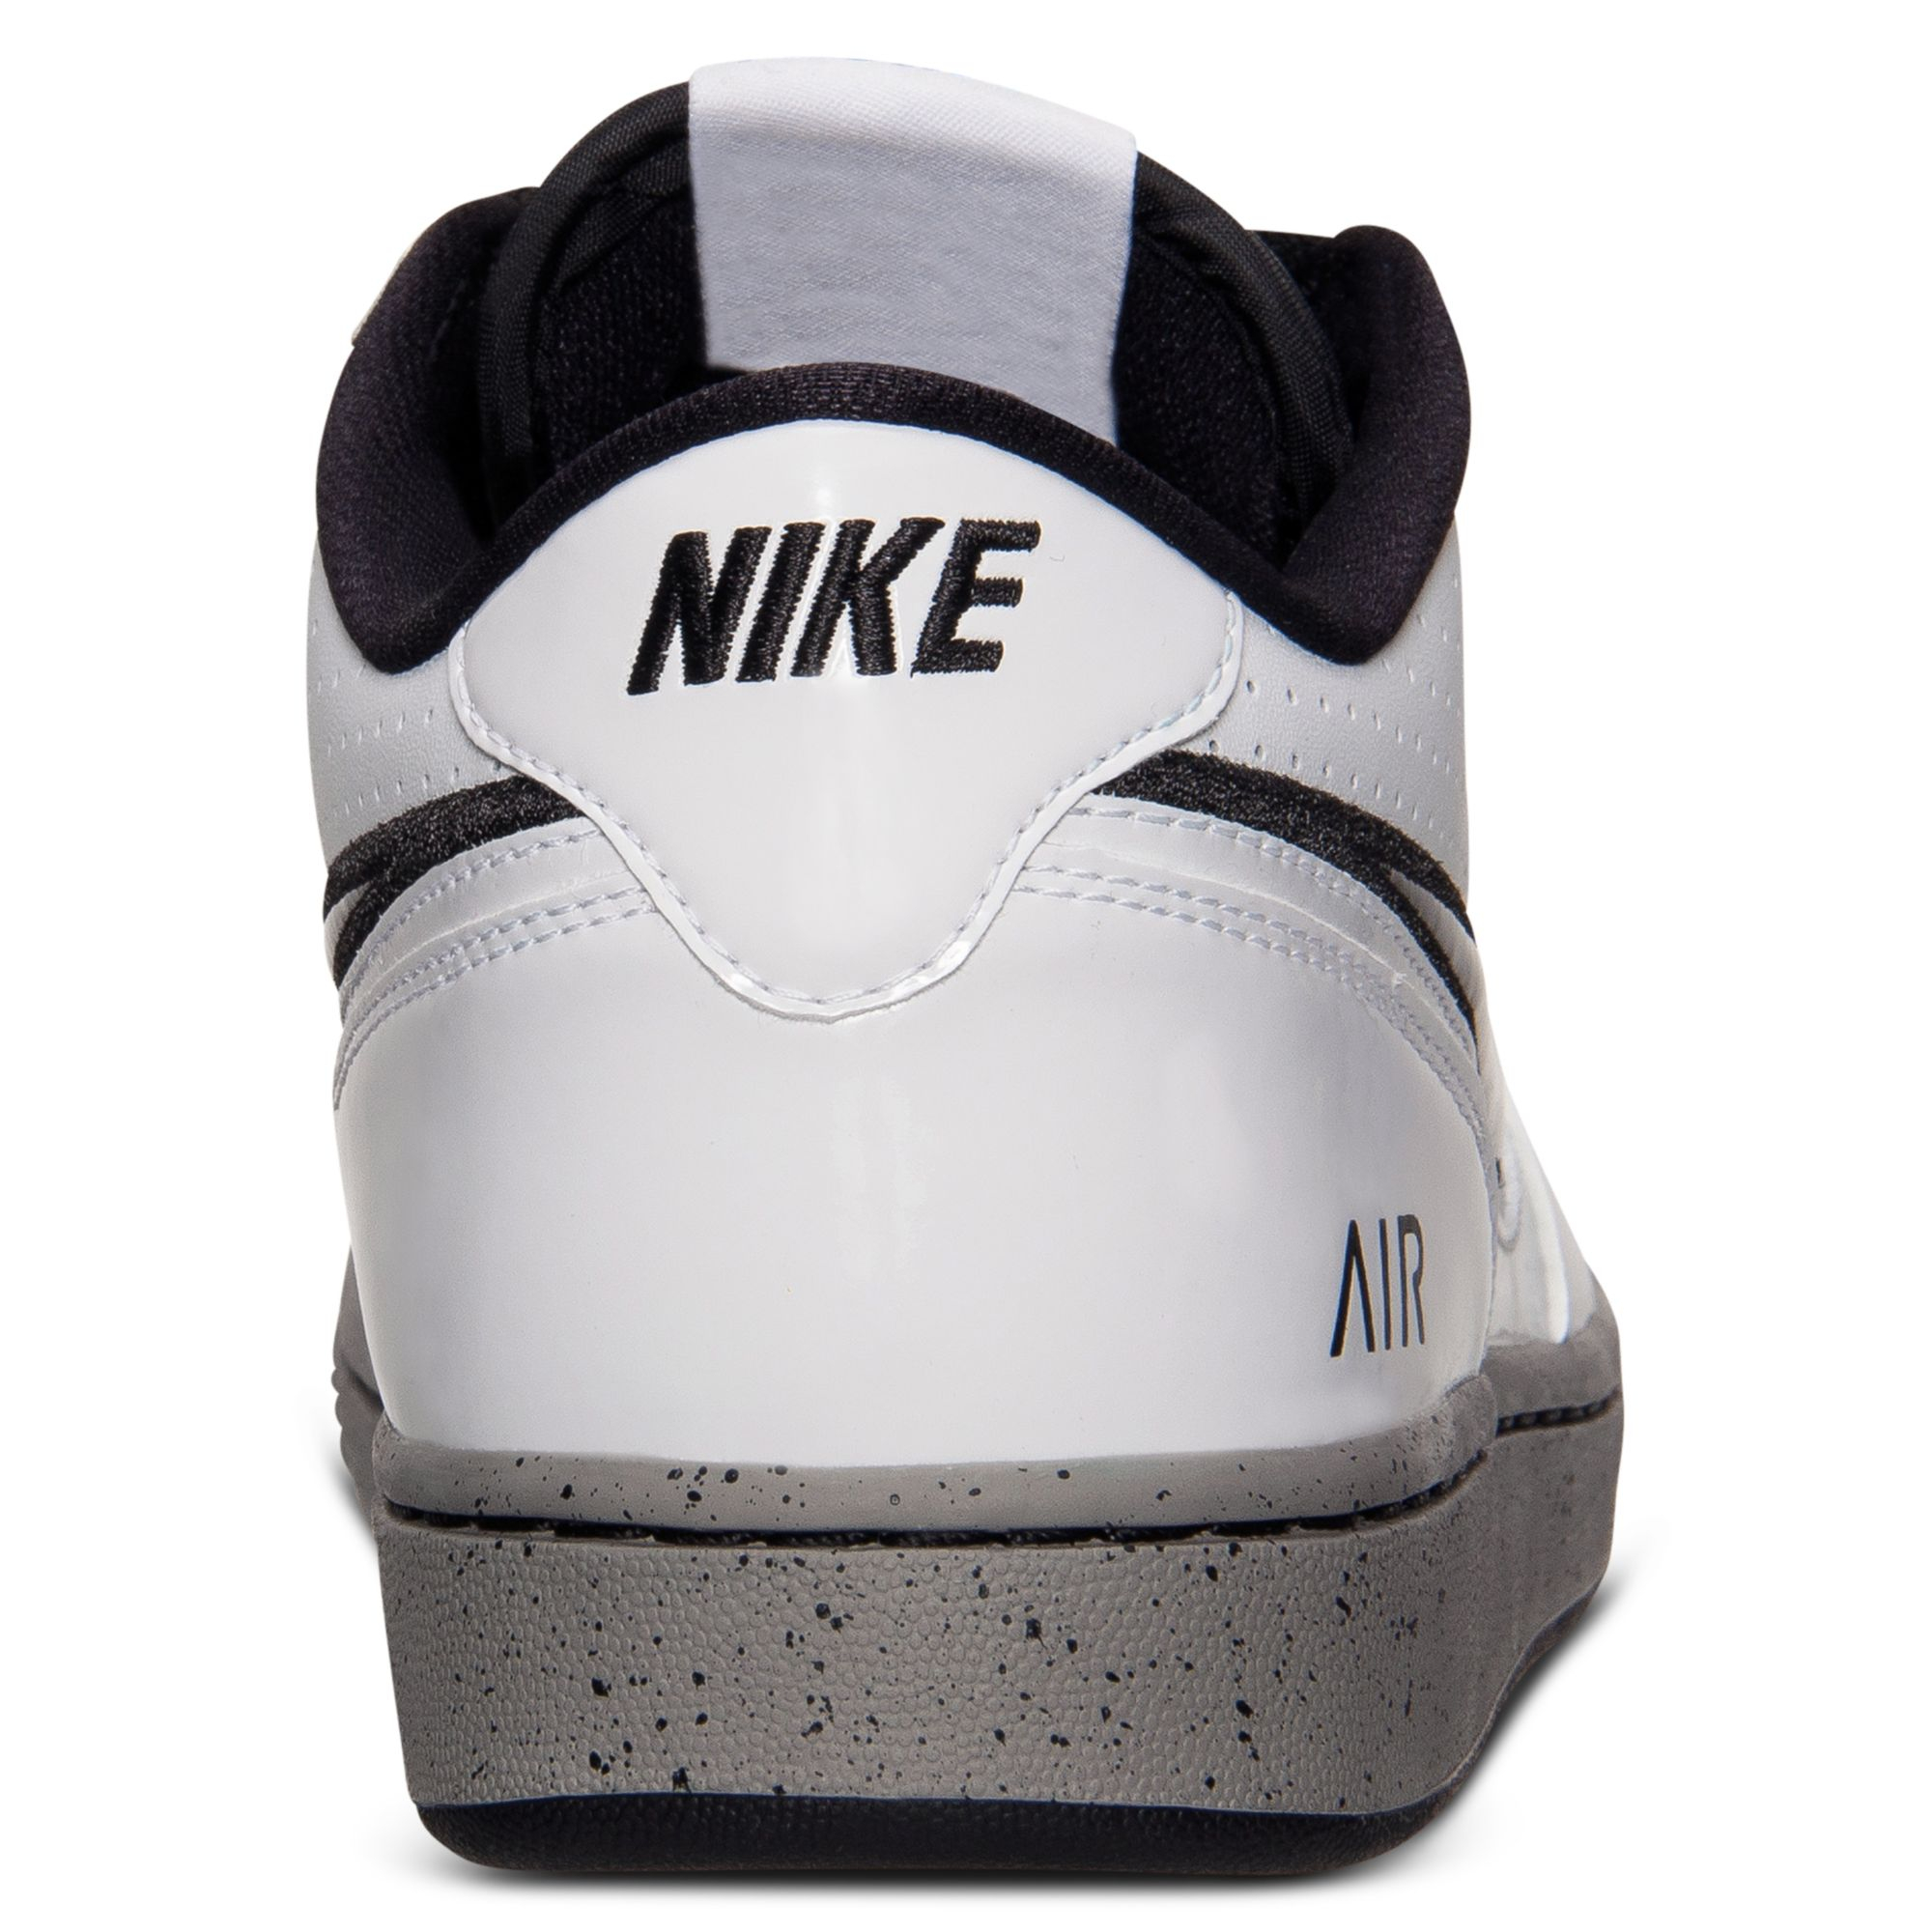 Lyst - Nike Mens Air Indee Casual Sneakers From Finish Line in White ...